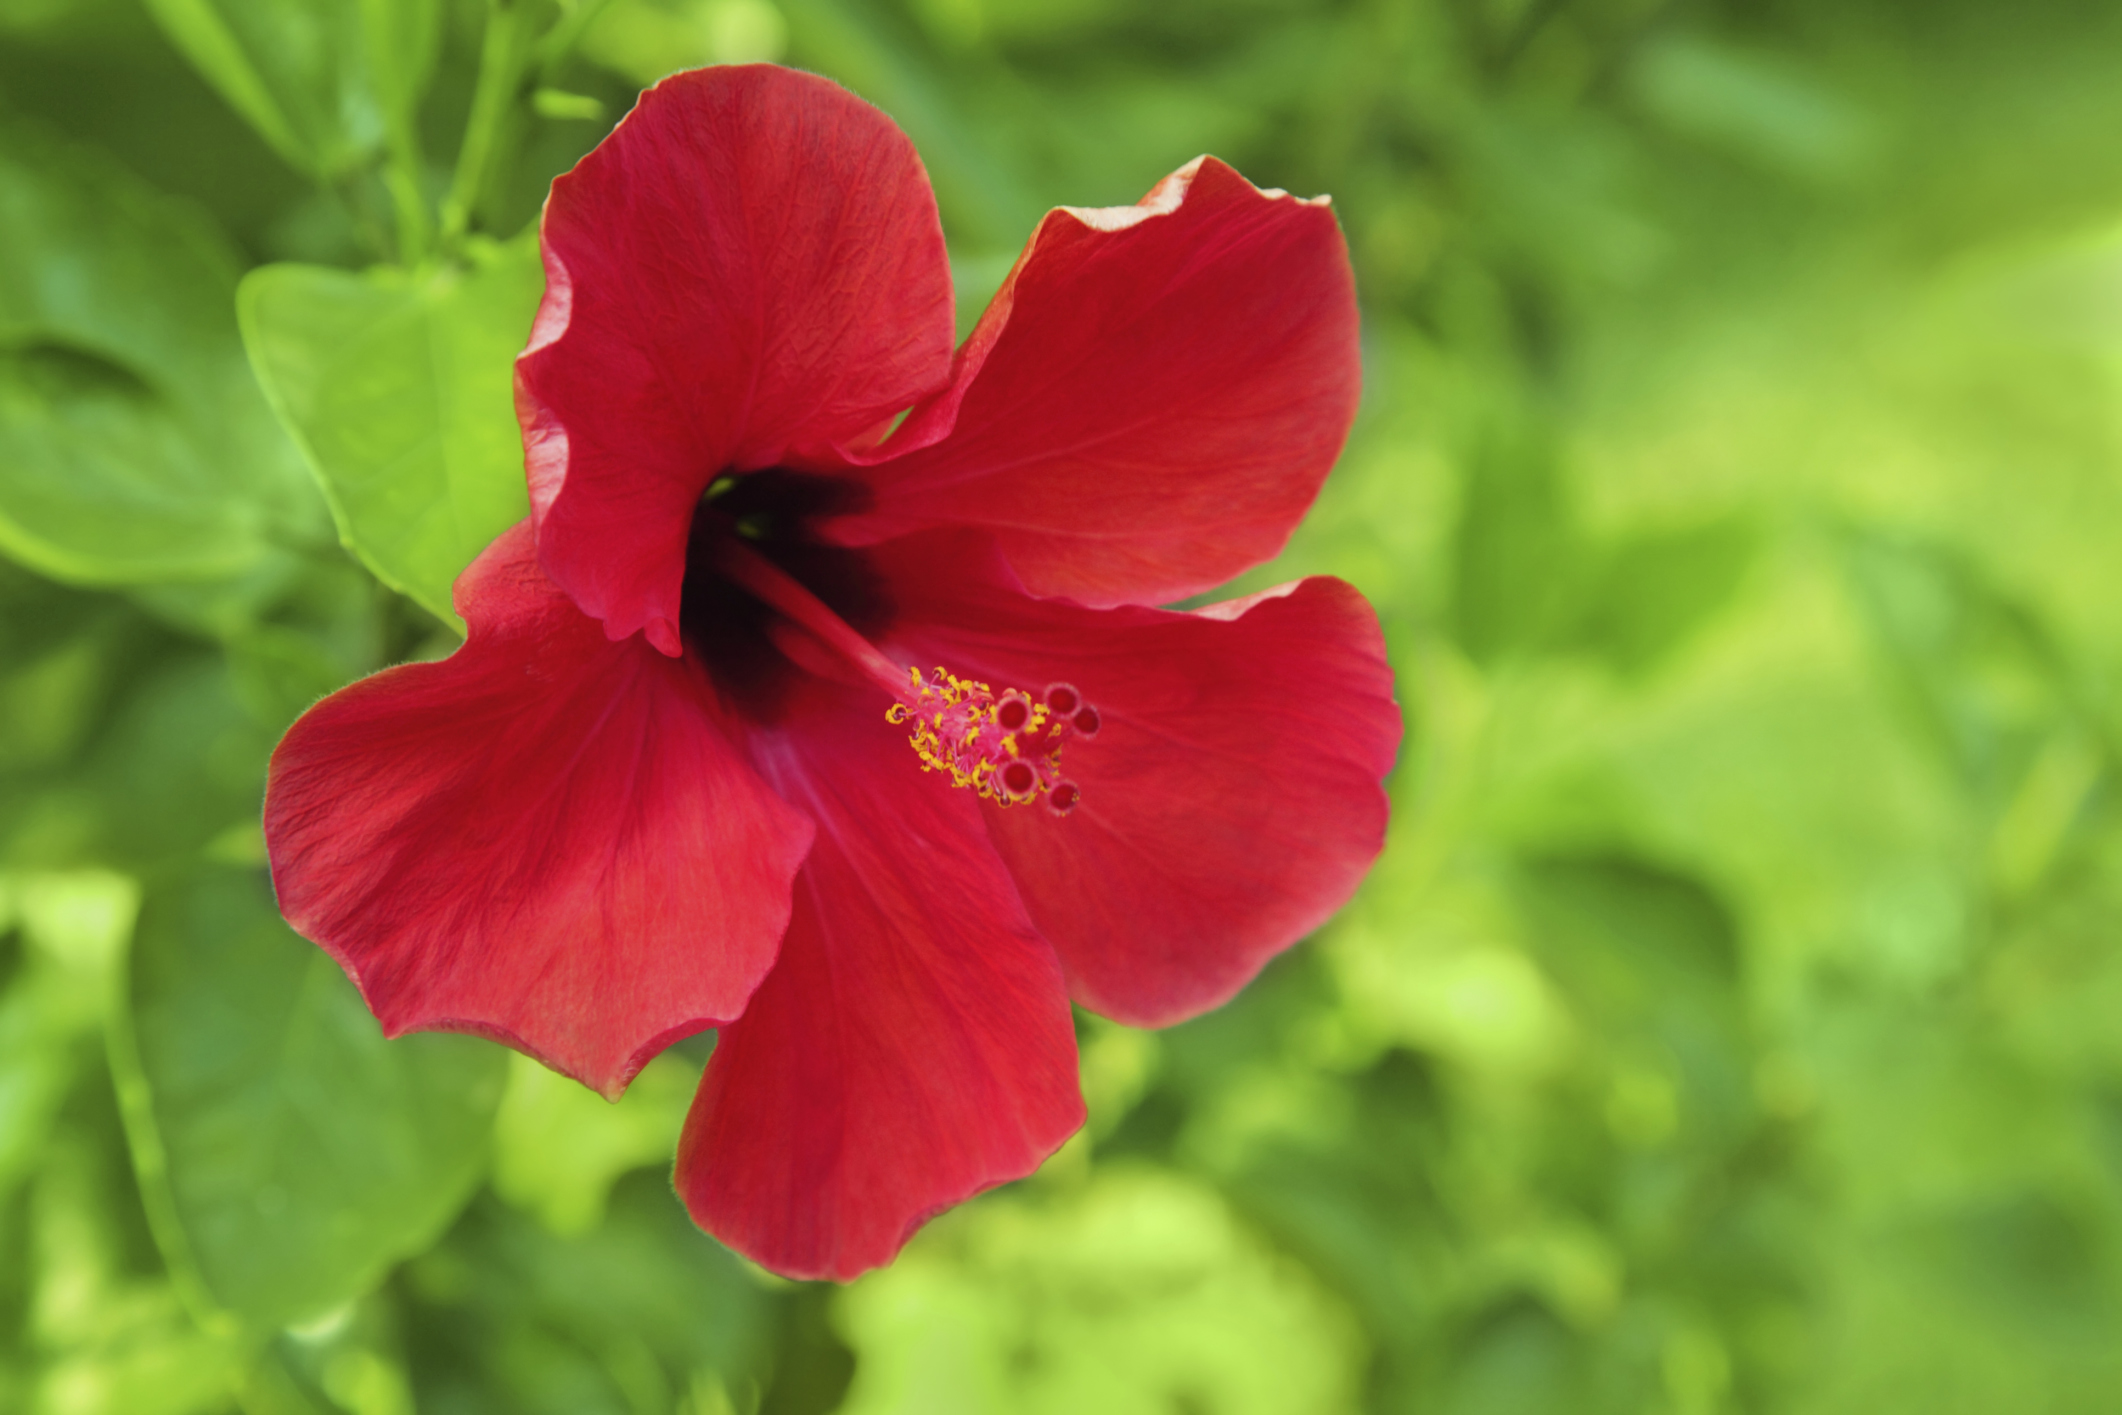 Hibiscus for Health: Overview, Benefits, & Side Effects: Gaia Herbs®